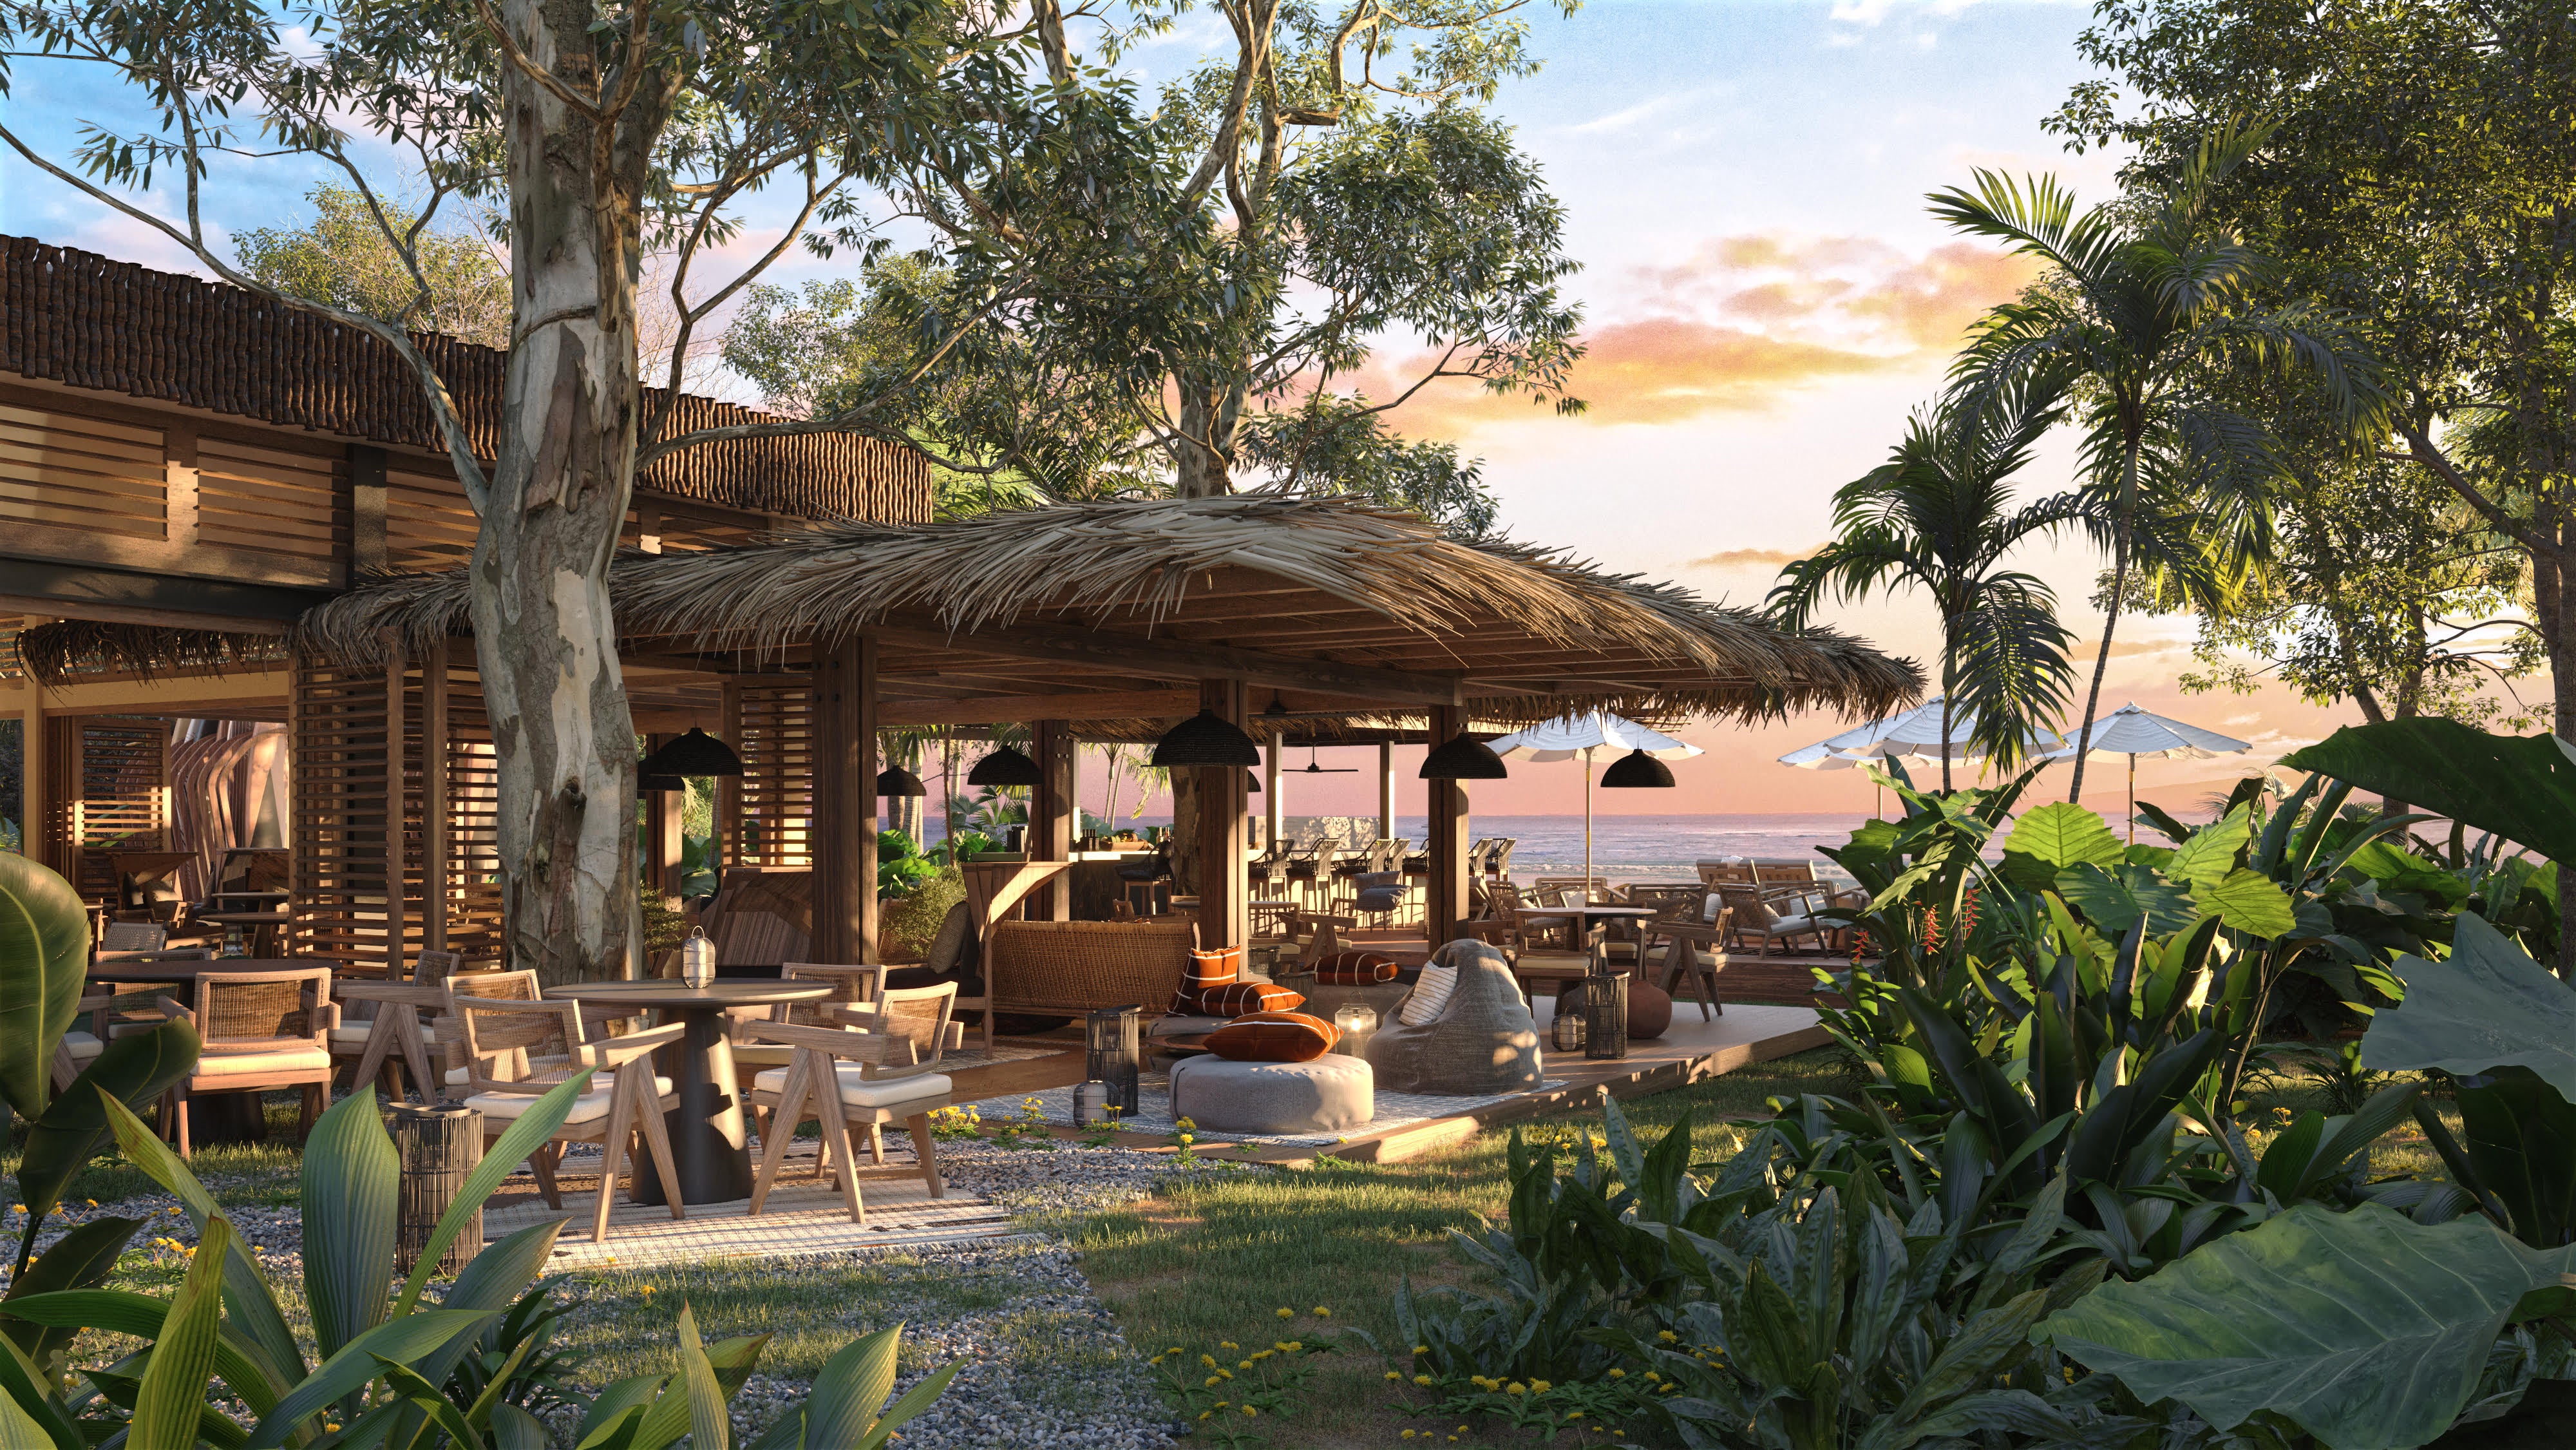 Our Habitas Santa Teresa will offer low-impact rooms and glamping tents